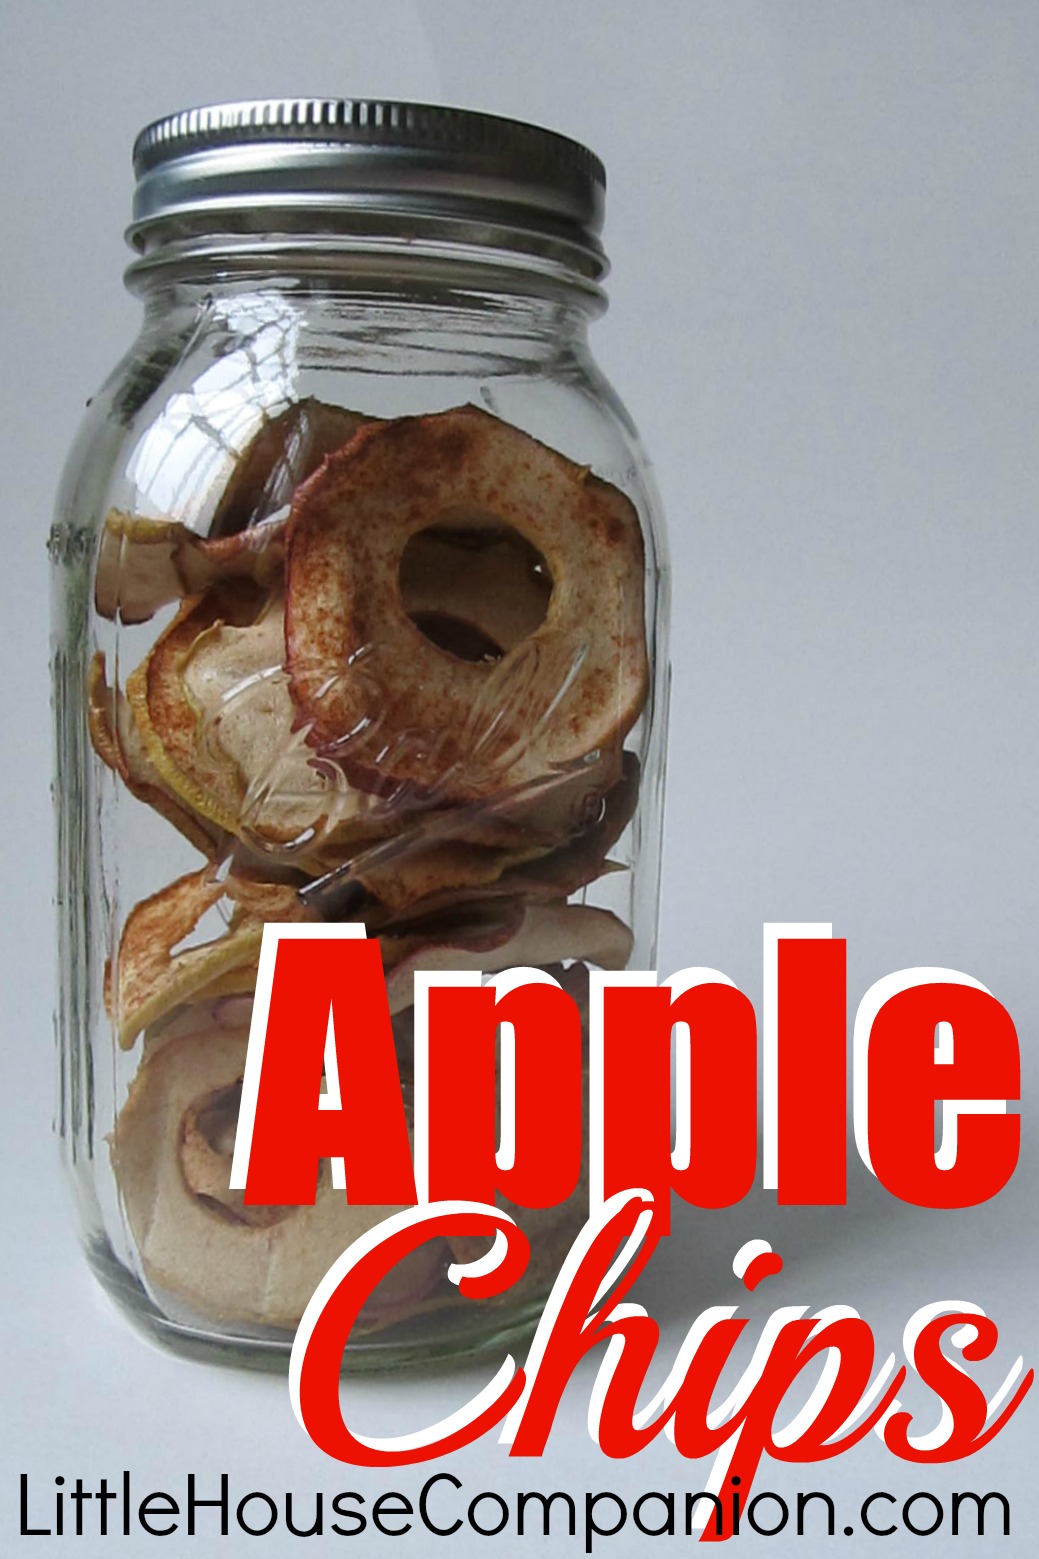 How to make dried apples/apple chips. #recipe #apples